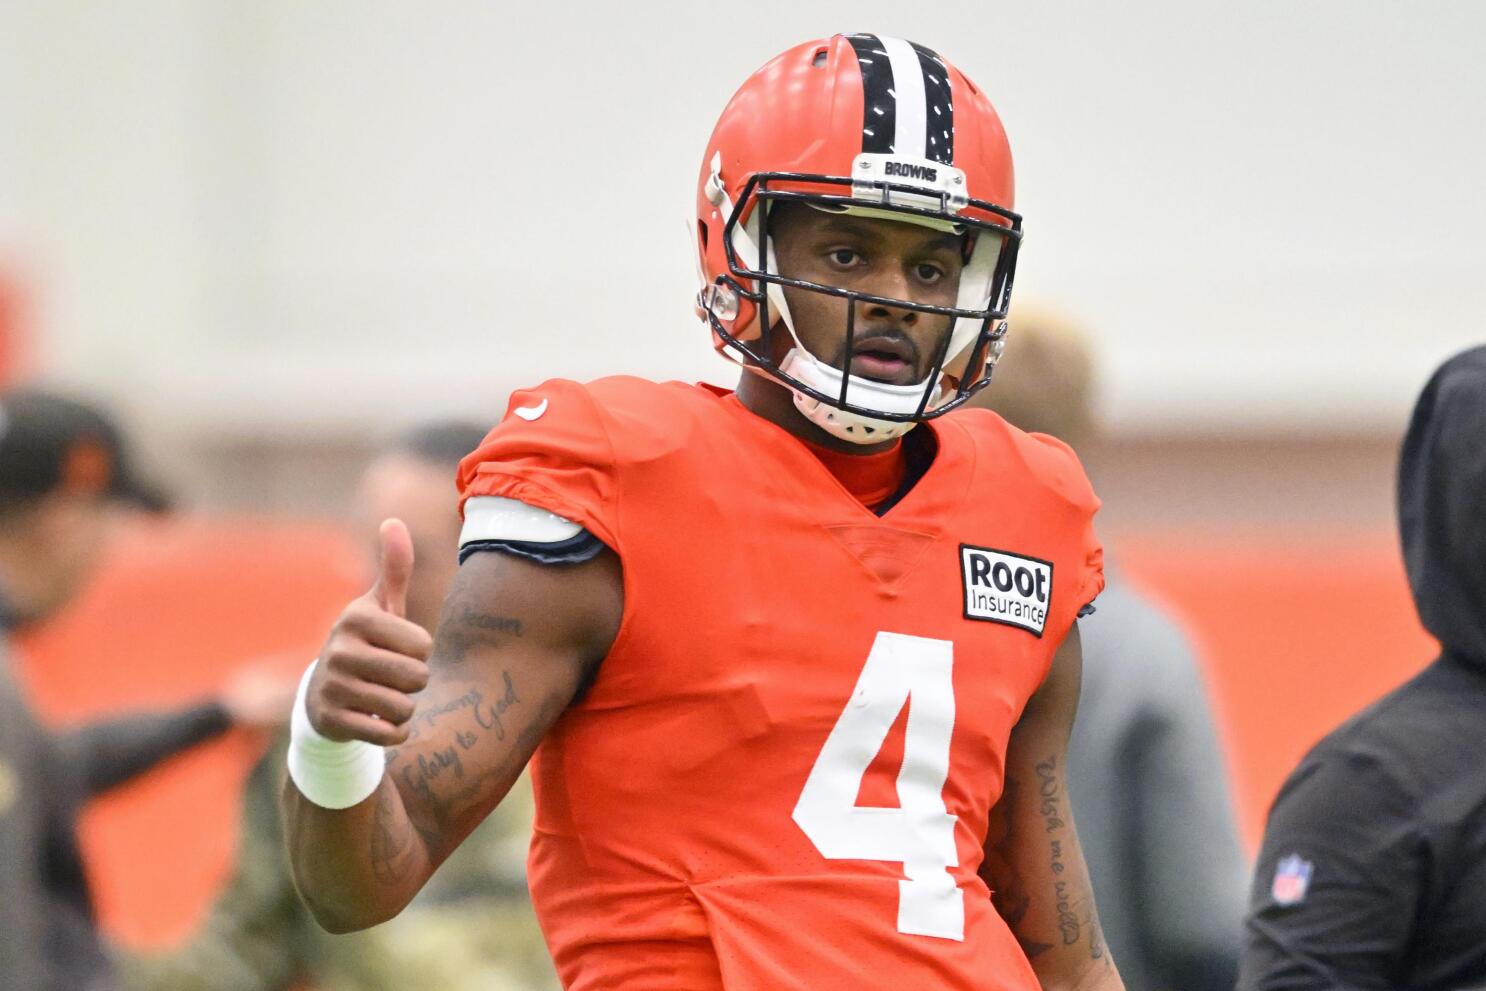 Watson, Browns regroup following season shaped by suspension - The